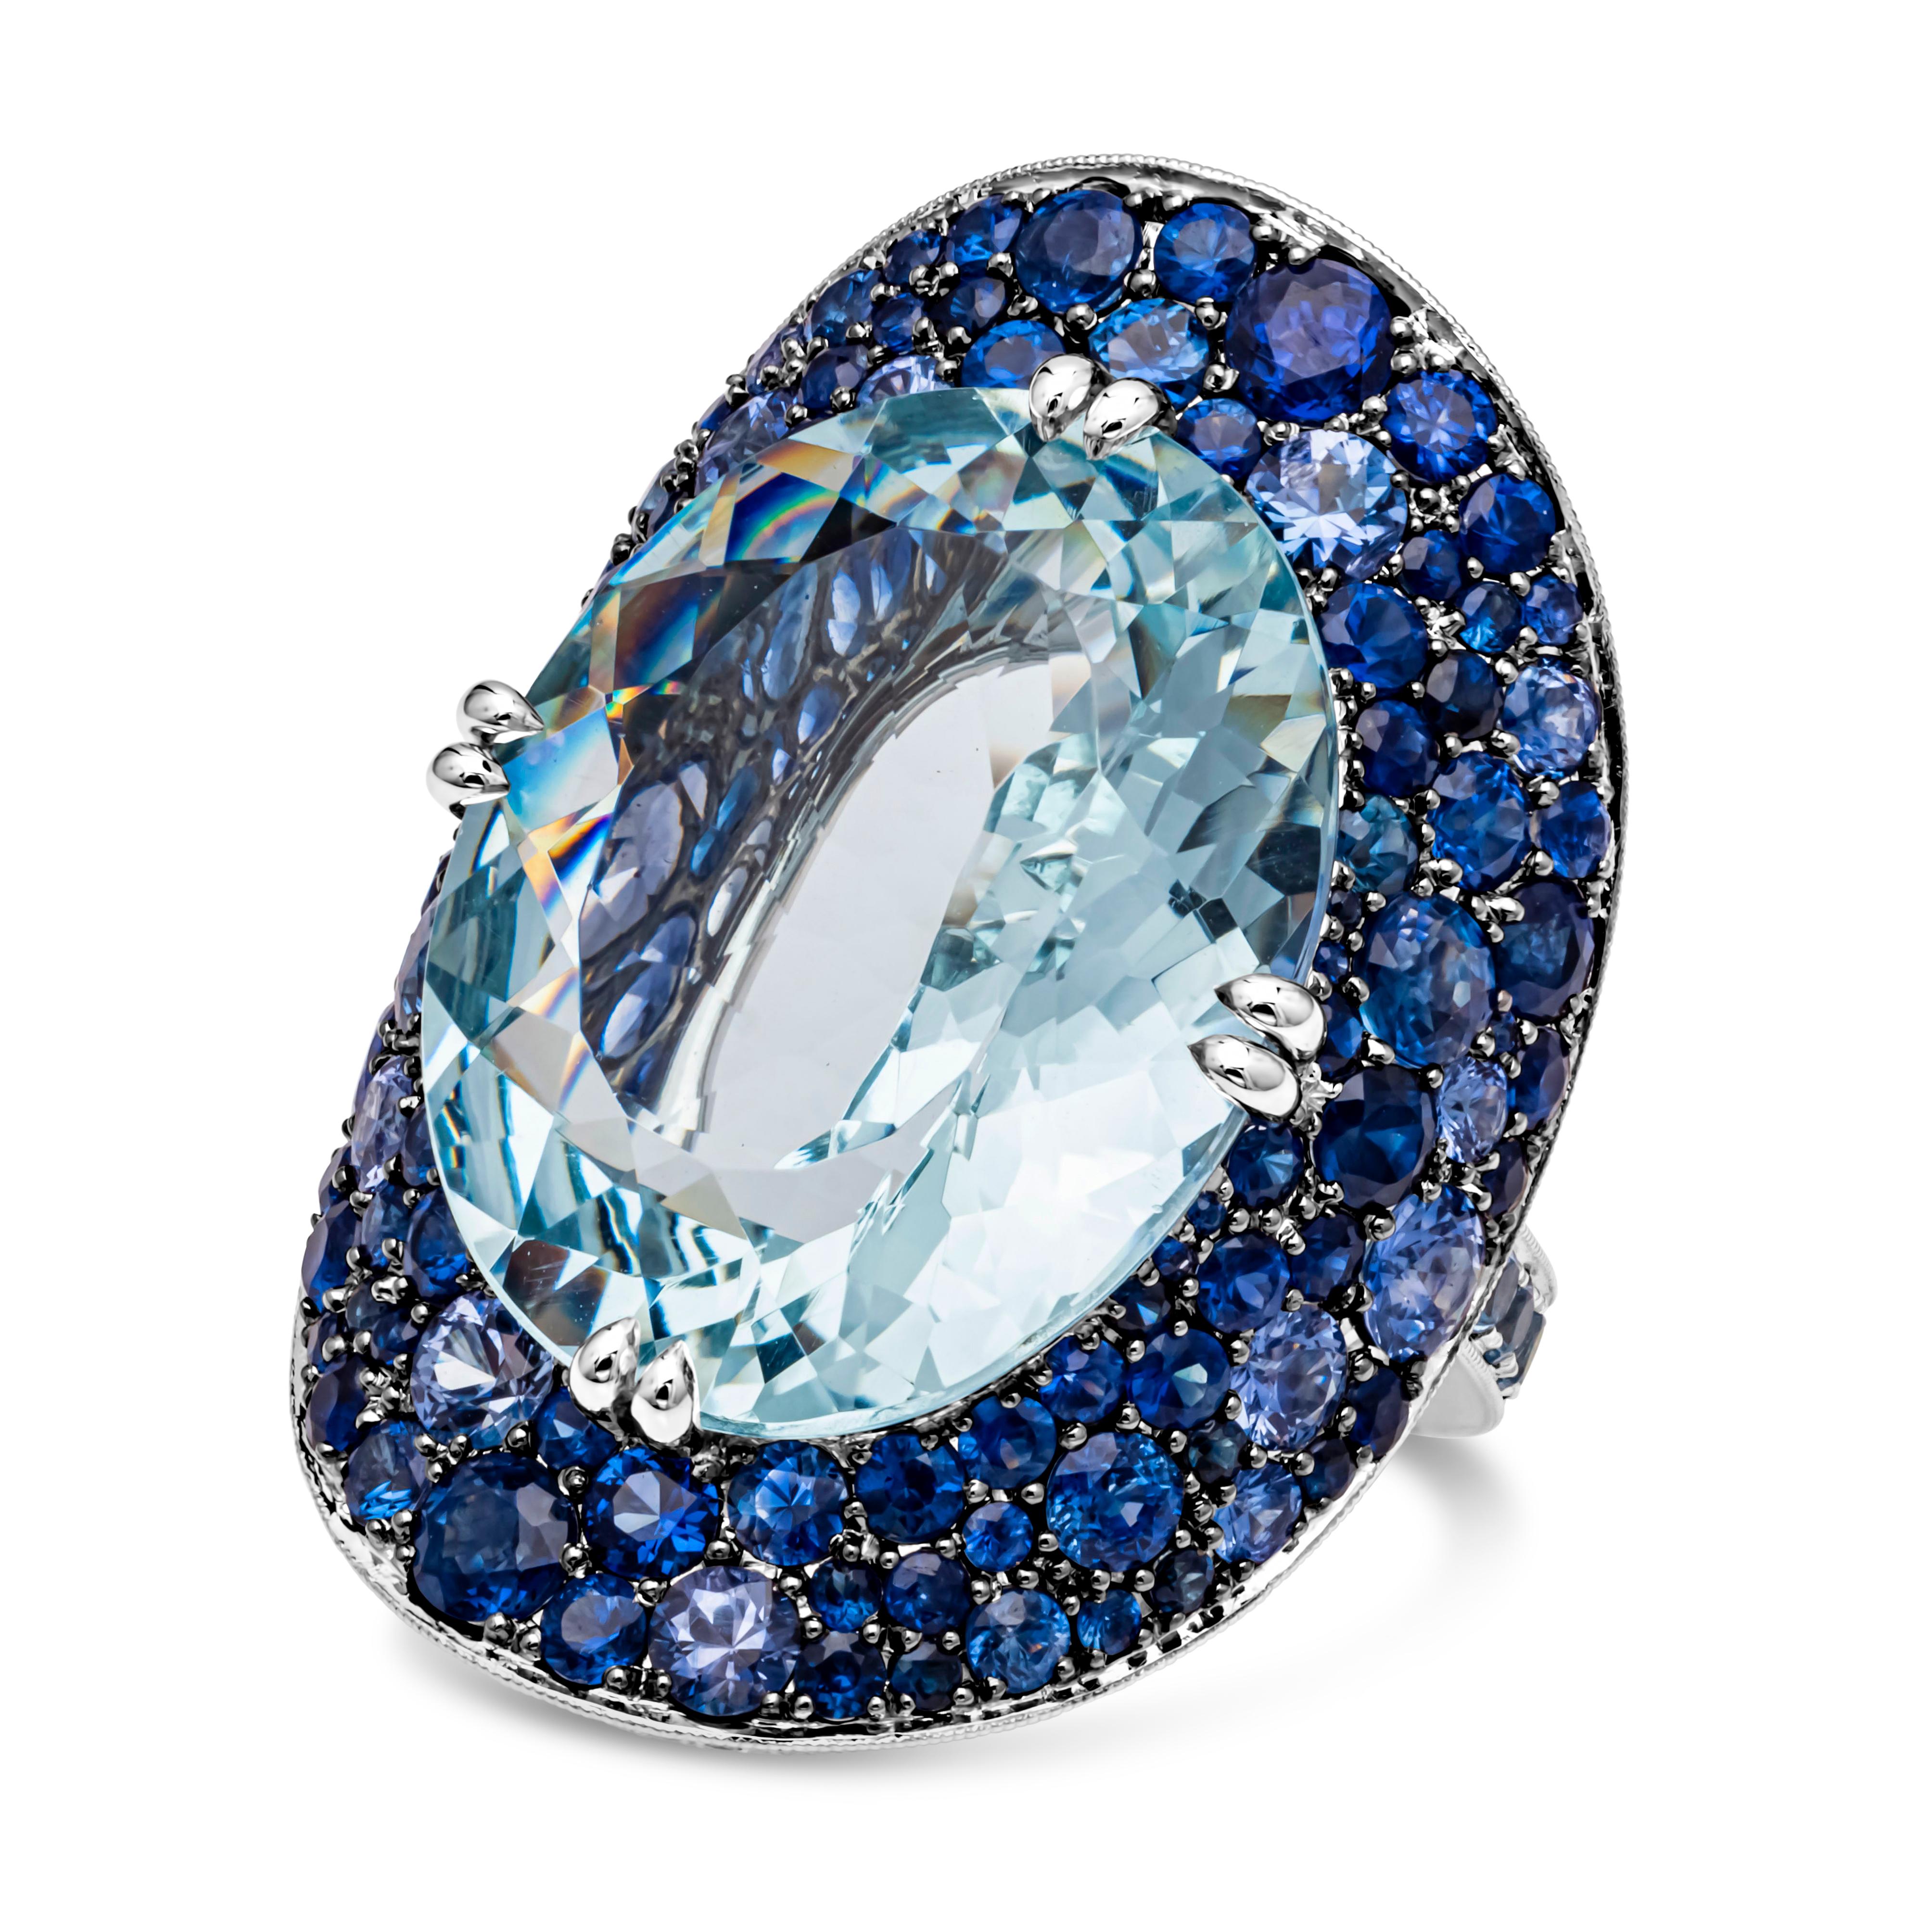 This beautiful and artistic large bonnet aquamarine ring showcasing an oval cut stunning aquamarine in the center weighing 19.69 carats total, set in a timeless eight prong basket setting. Surrounded by brilliant round blue sapphires and aquamarine